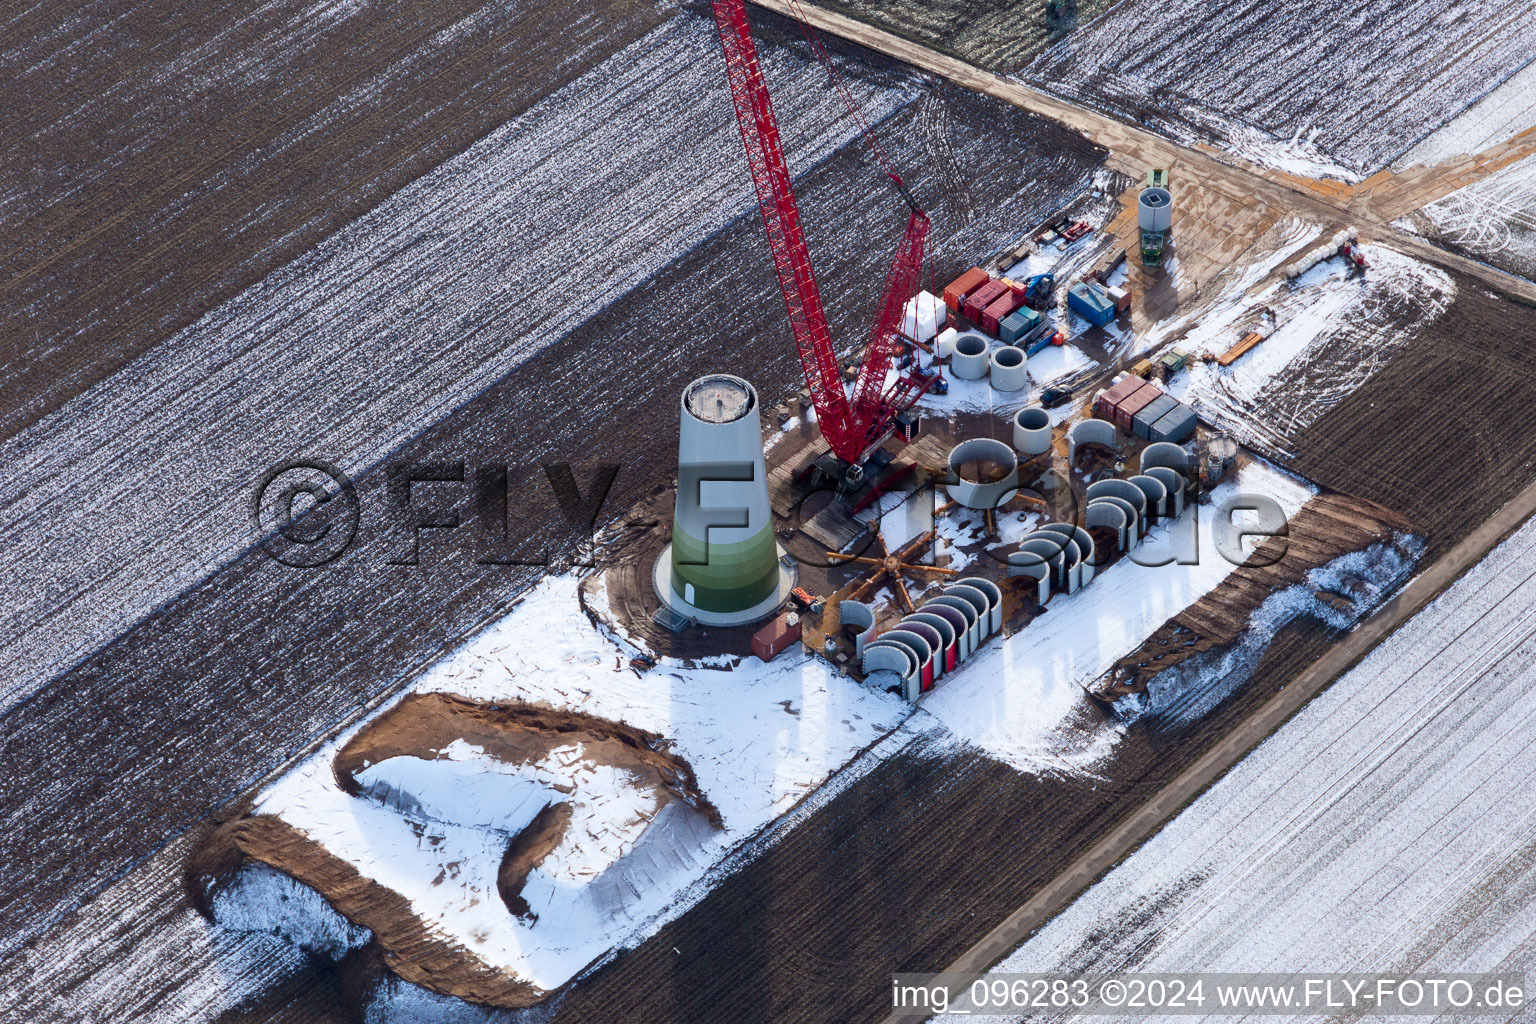 Aerial photograpy of Wintry snowy Construction site for wind turbine installation in Hatzenbuehl in the state Rhineland-Palatinate, Germany